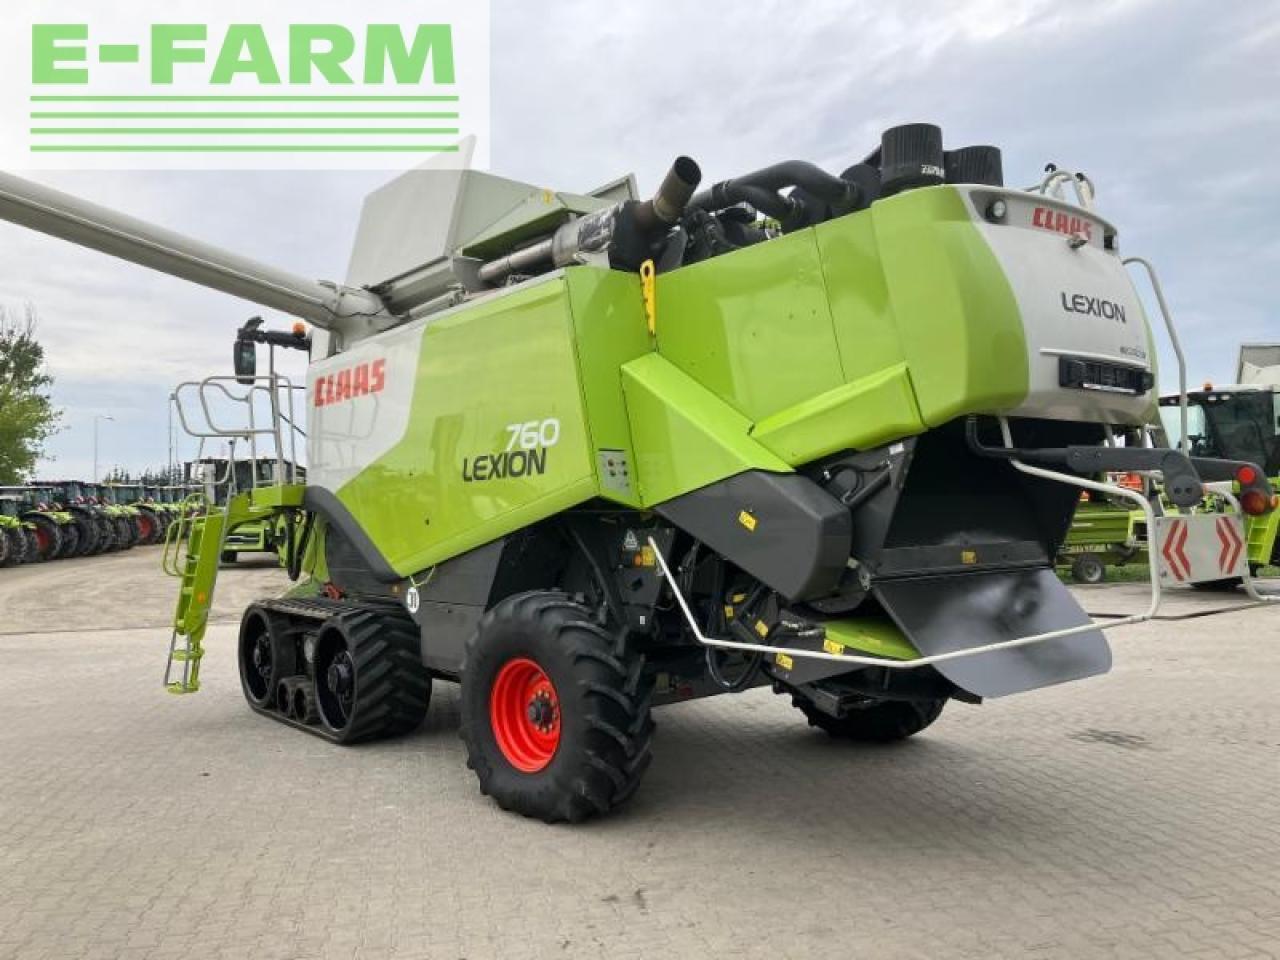 Combine harvester CLAAS lexion 760 terra trac: picture 6